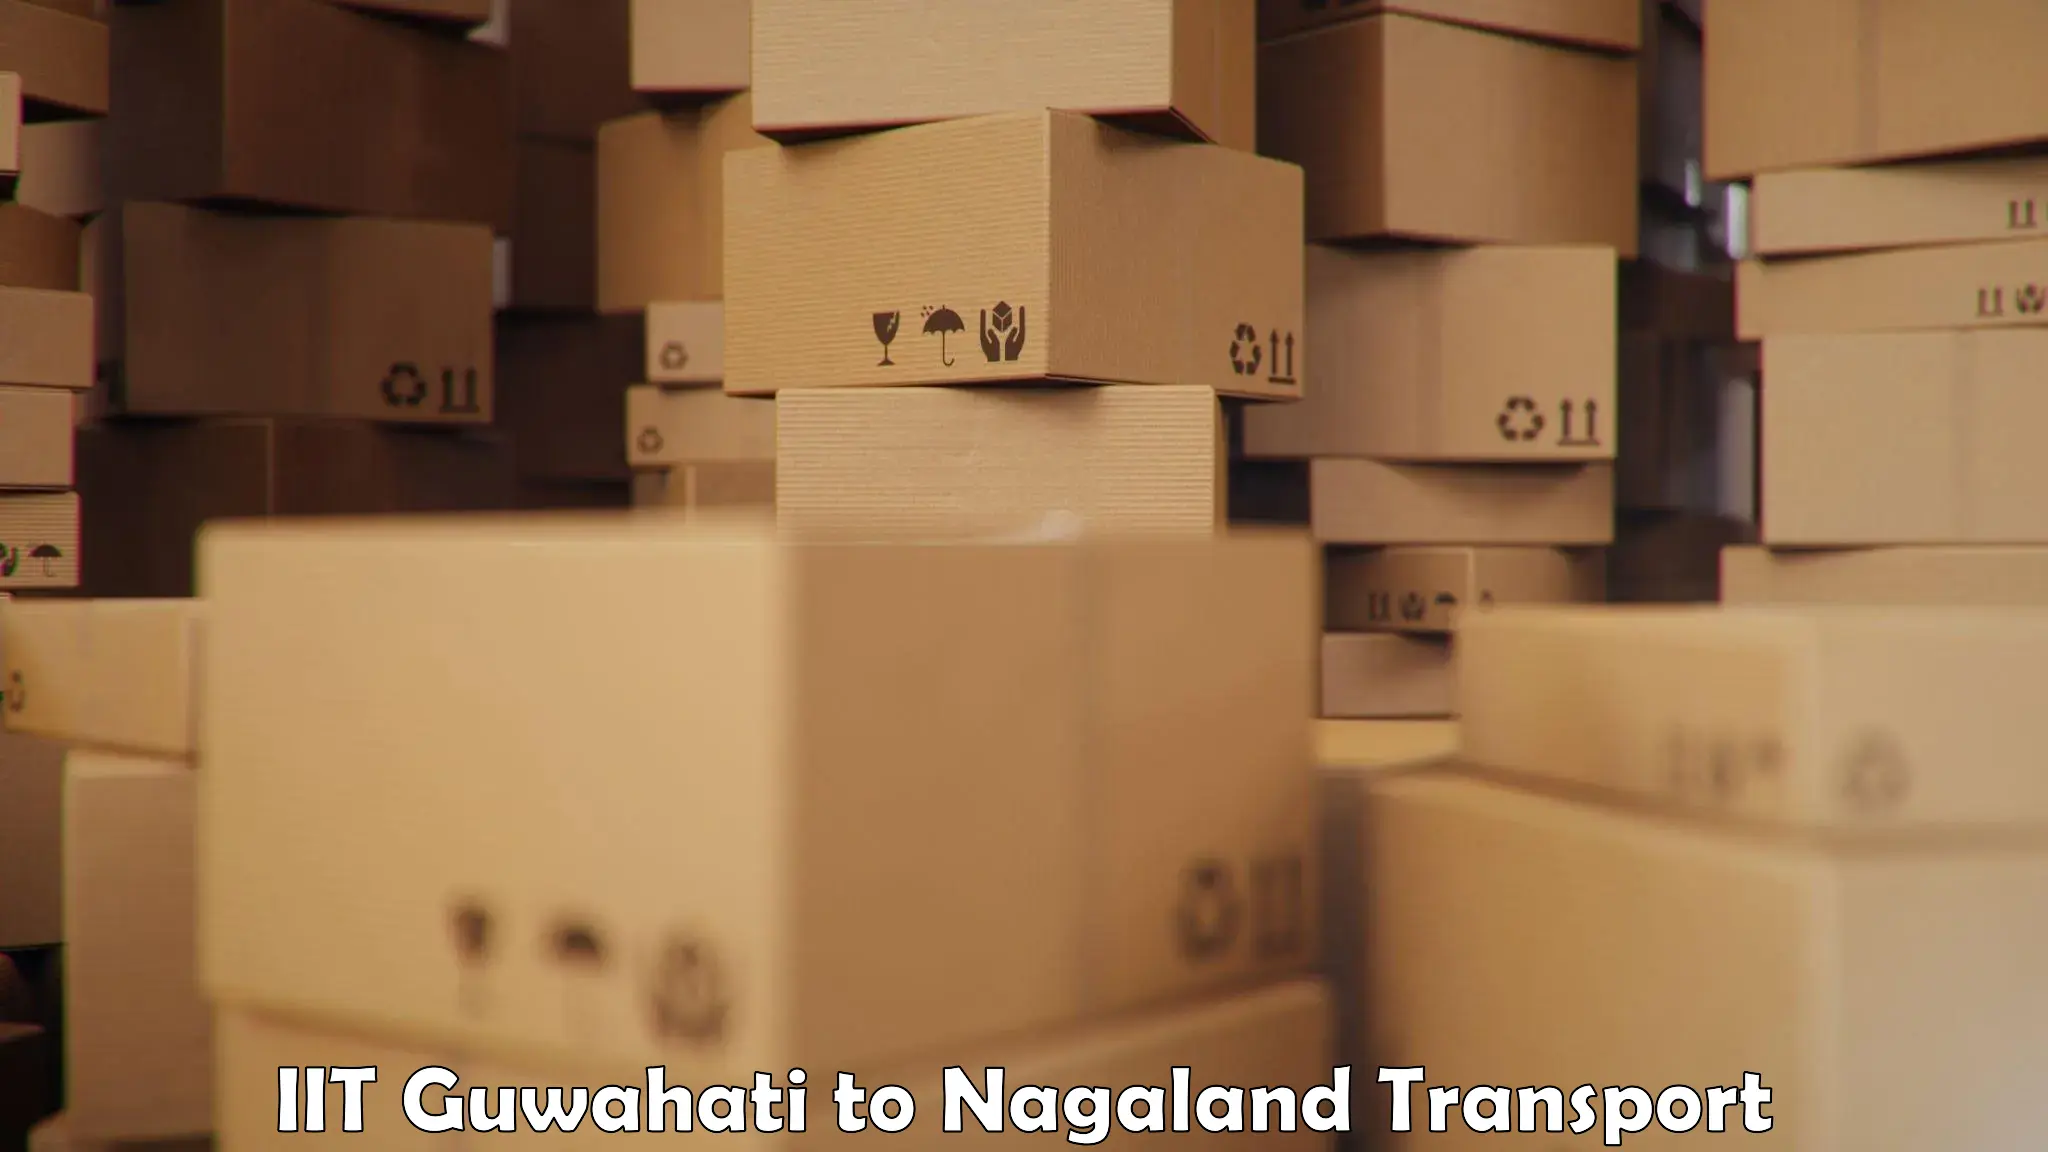 Container transport service IIT Guwahati to NIT Nagaland